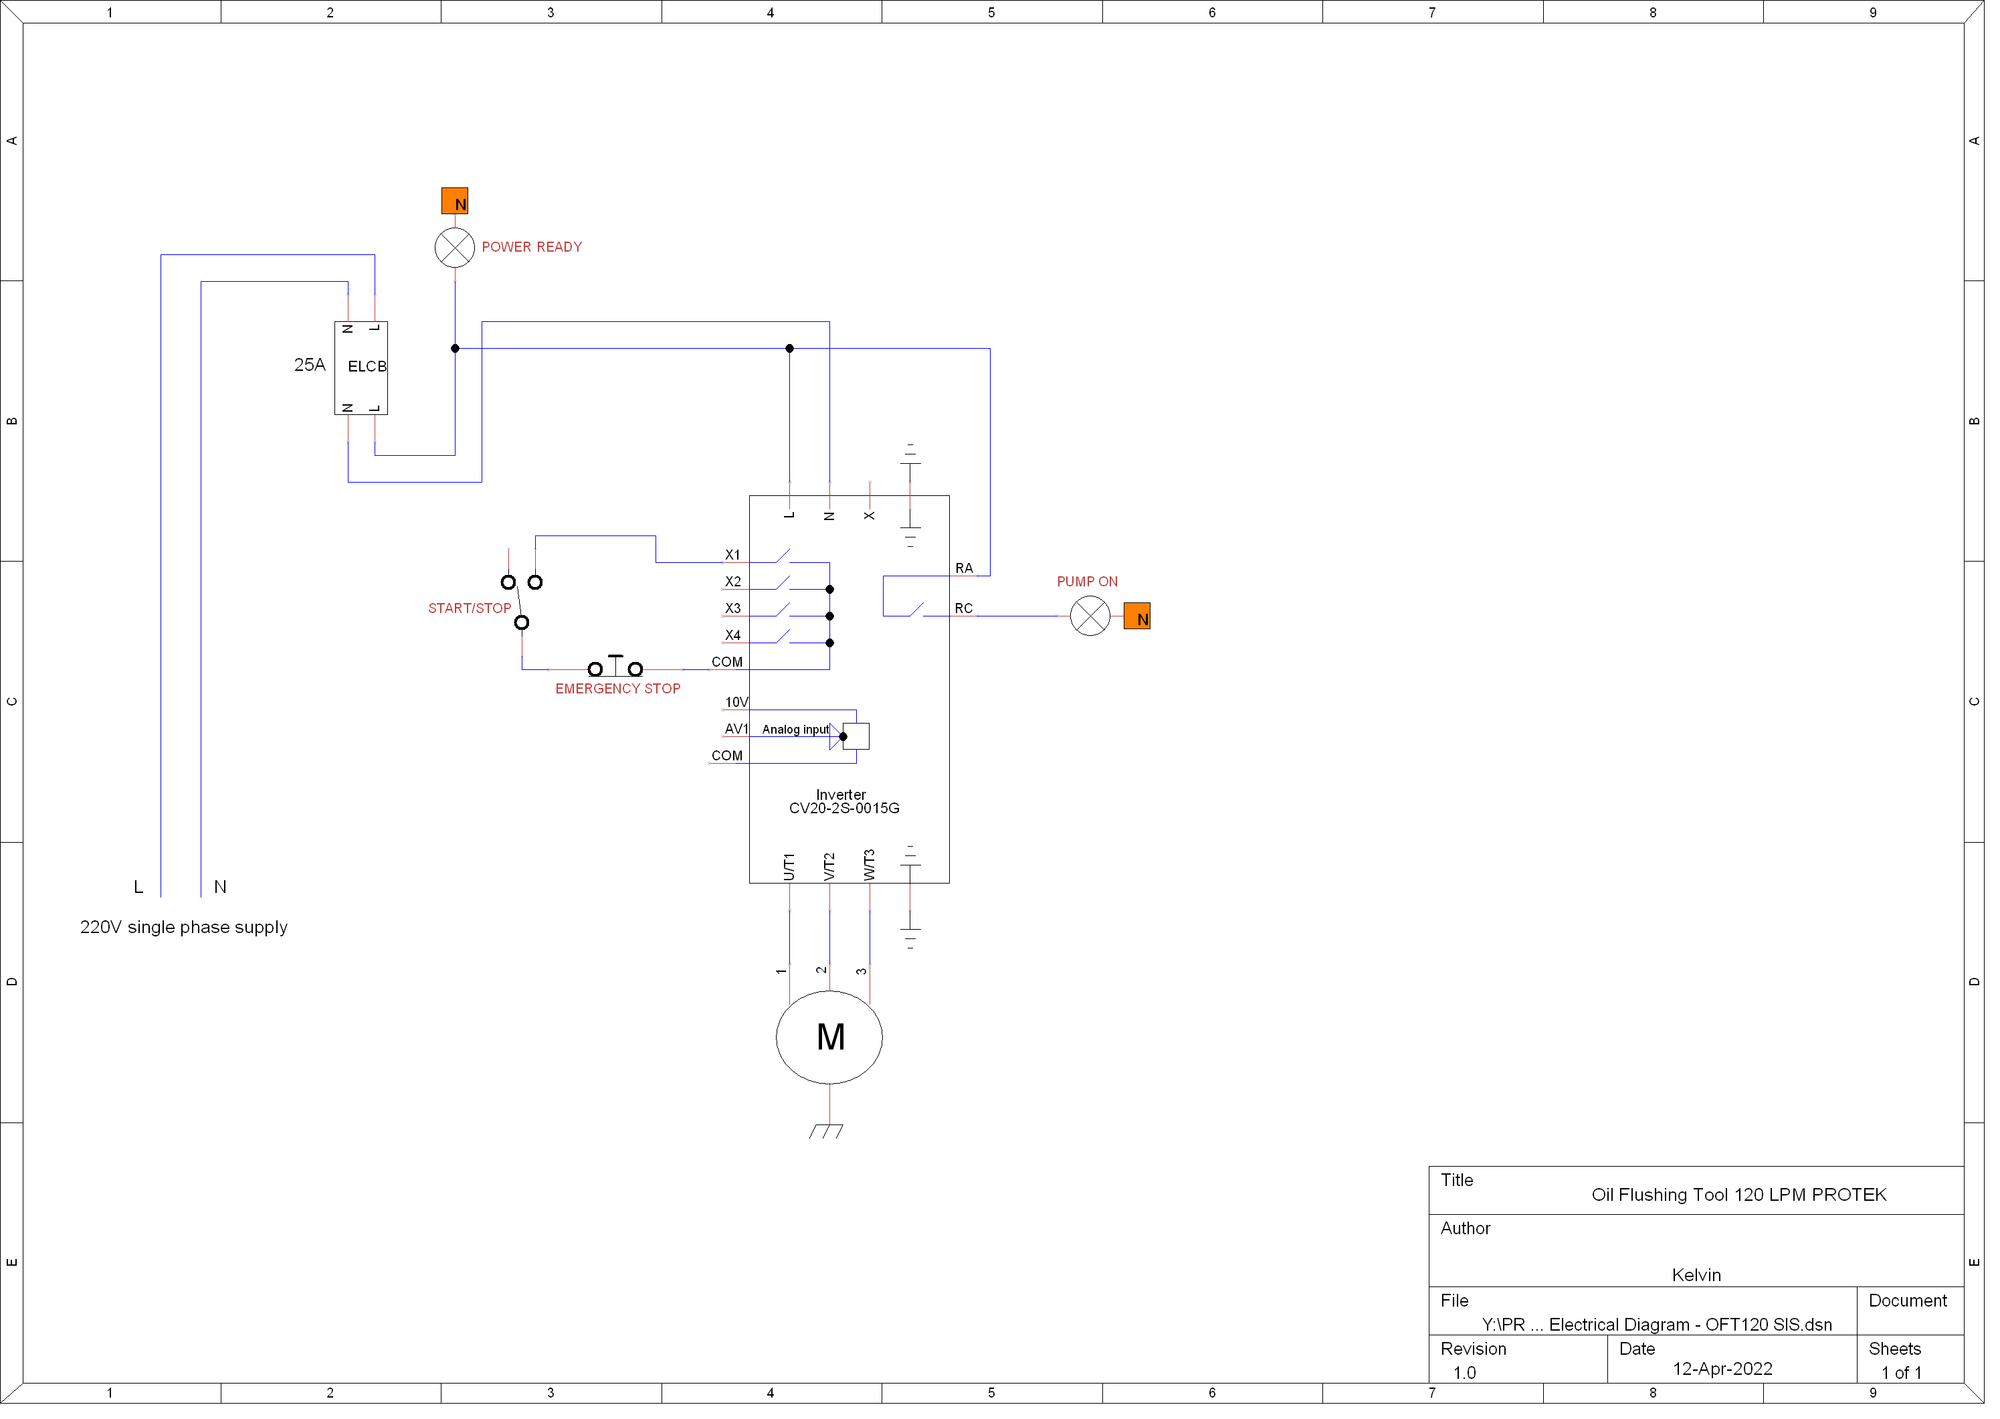 Electrical Diagram - OFT120 SIS.png